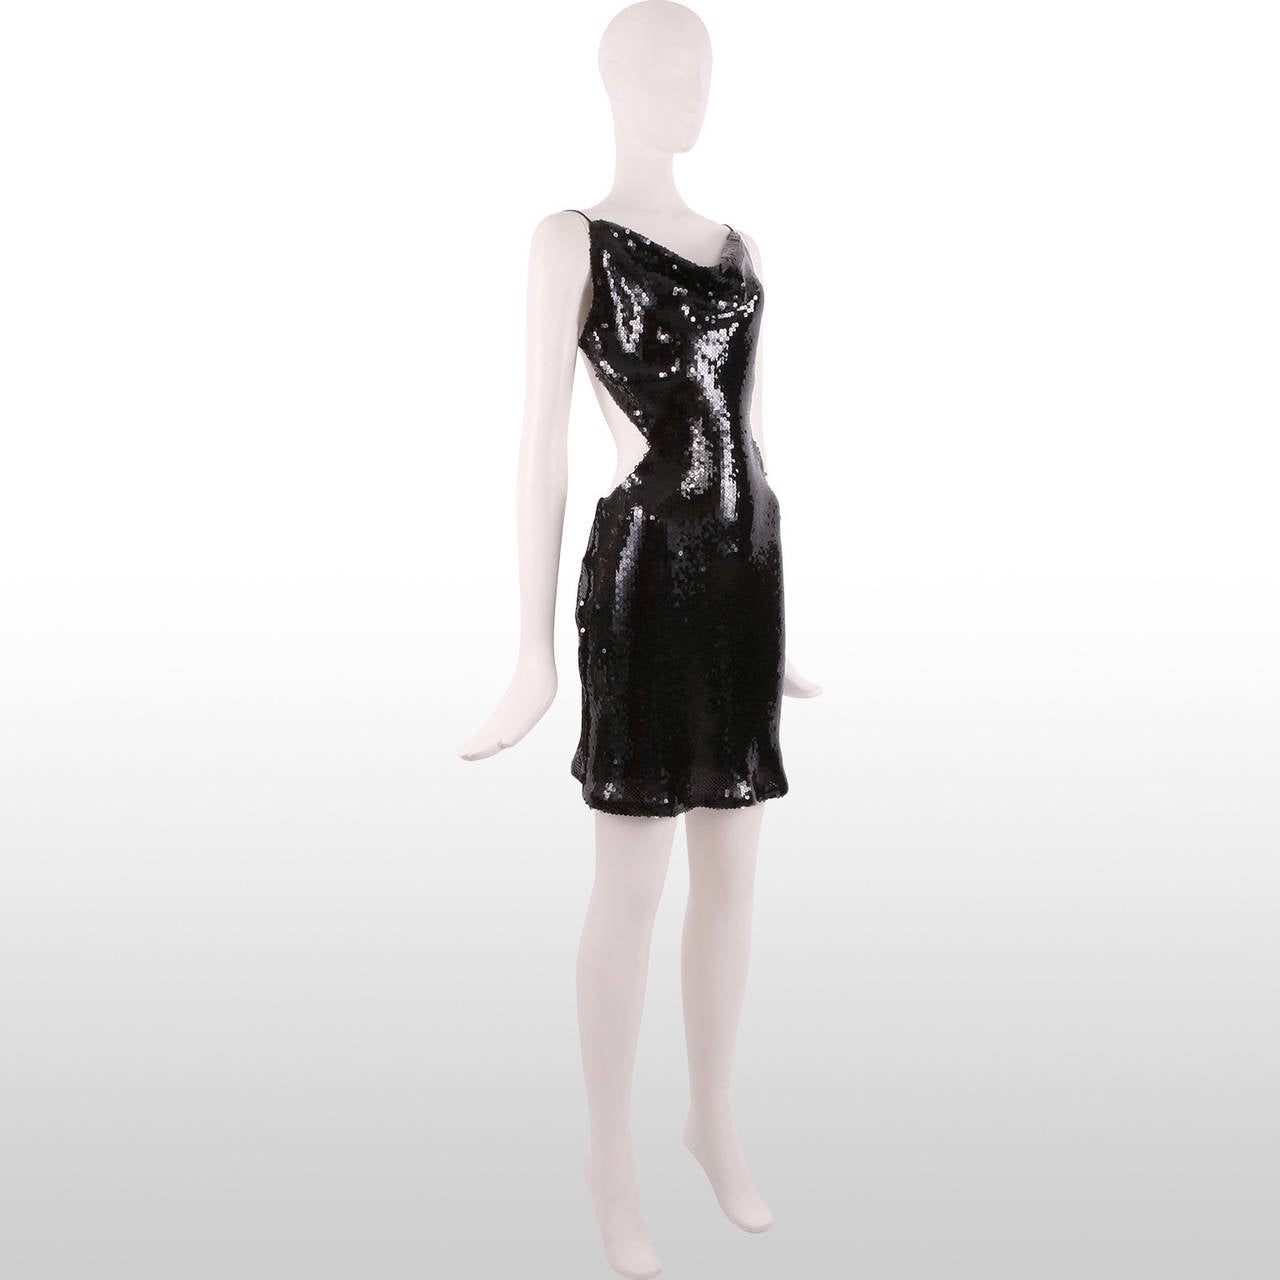 This is a very sexy and skin revealing sequin dress by the designer Maria Grachvogel, who is one of Victoria Beckham's favourite designers. Remains in excellent condition.